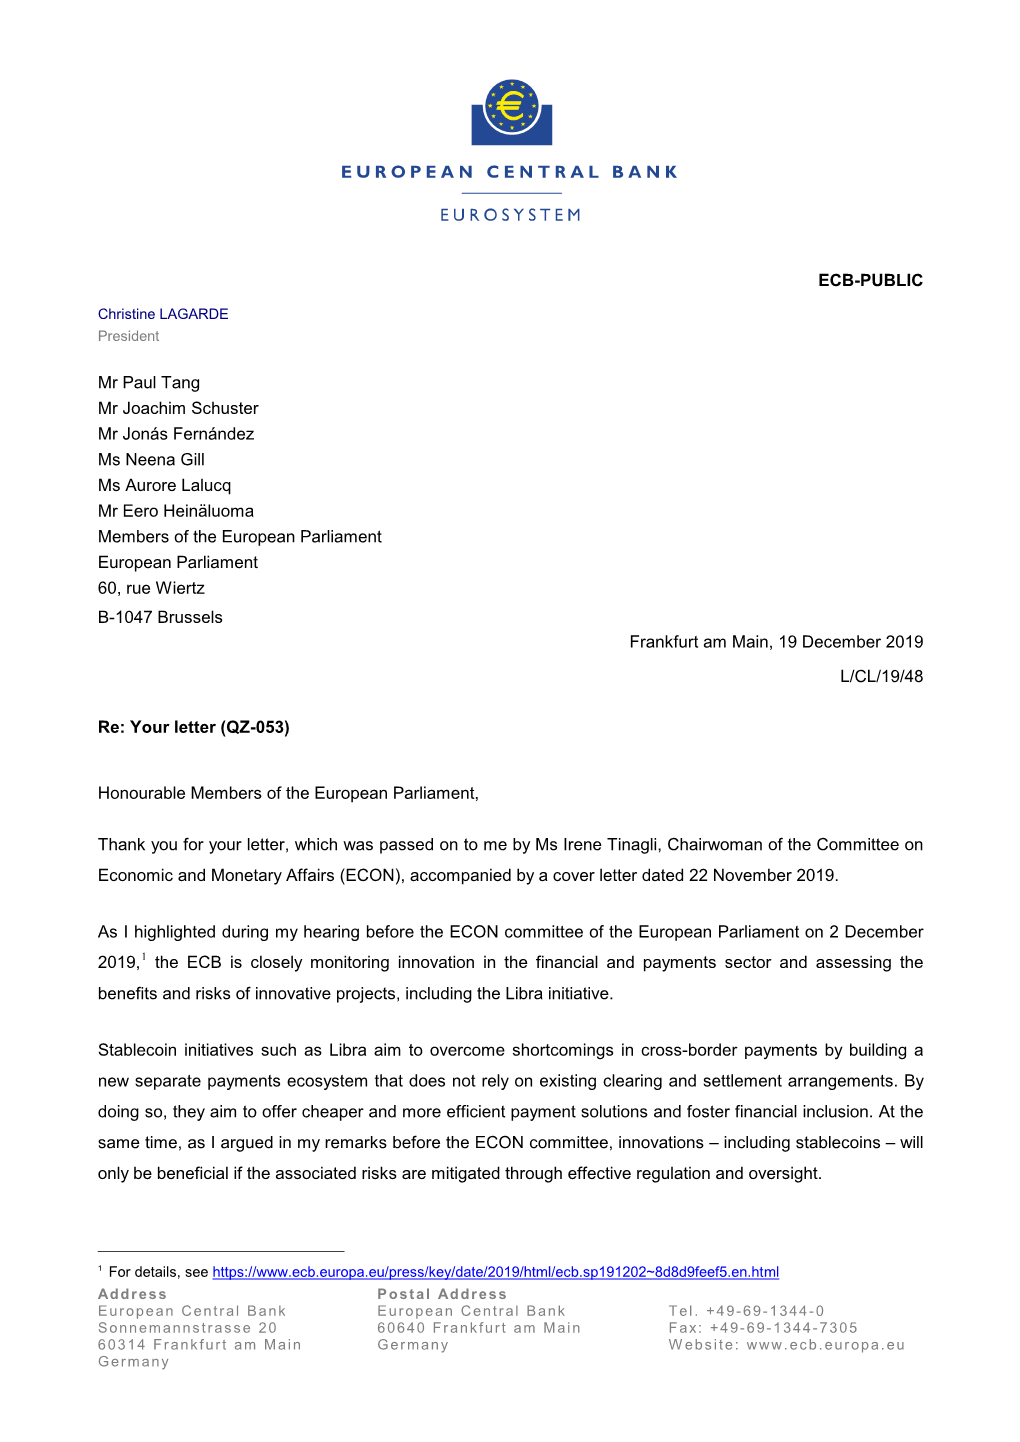 Letter from the ECB President to Mr Paul Tang, Mr Joachim Schuster, Mr Jonás Fernández, Ms Neena Gill, Ms Aurore Lalucq and Mr